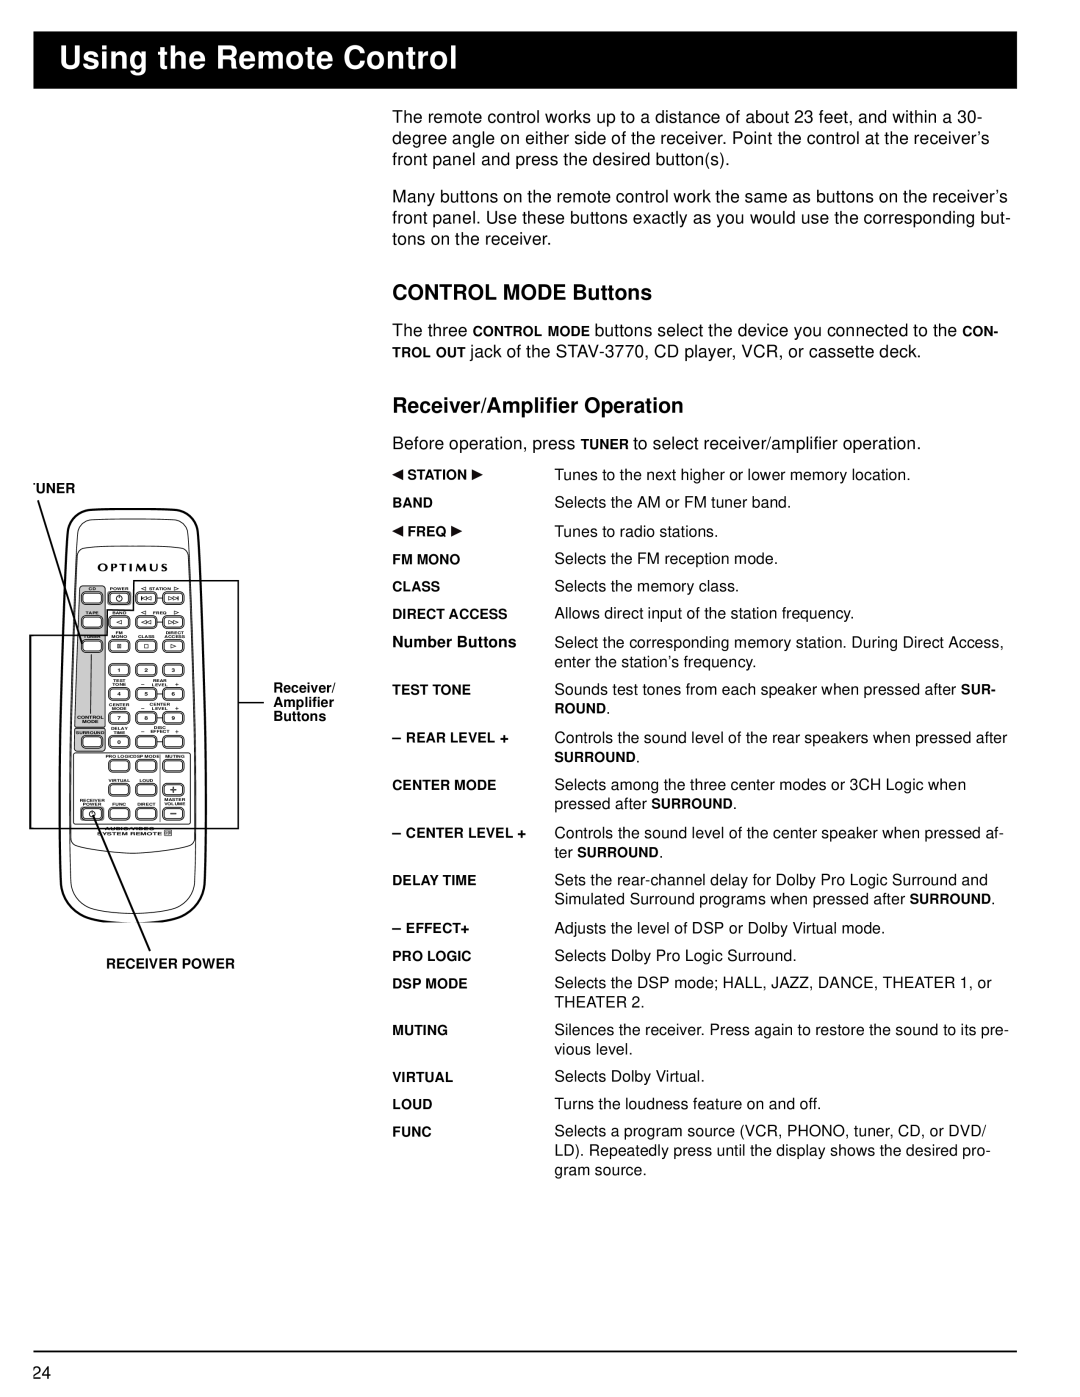 Panasonic STAV-3770 owner manual Using the Remote Control, CONTROL MODE Buttons, Receiver/Amplifier Operation 